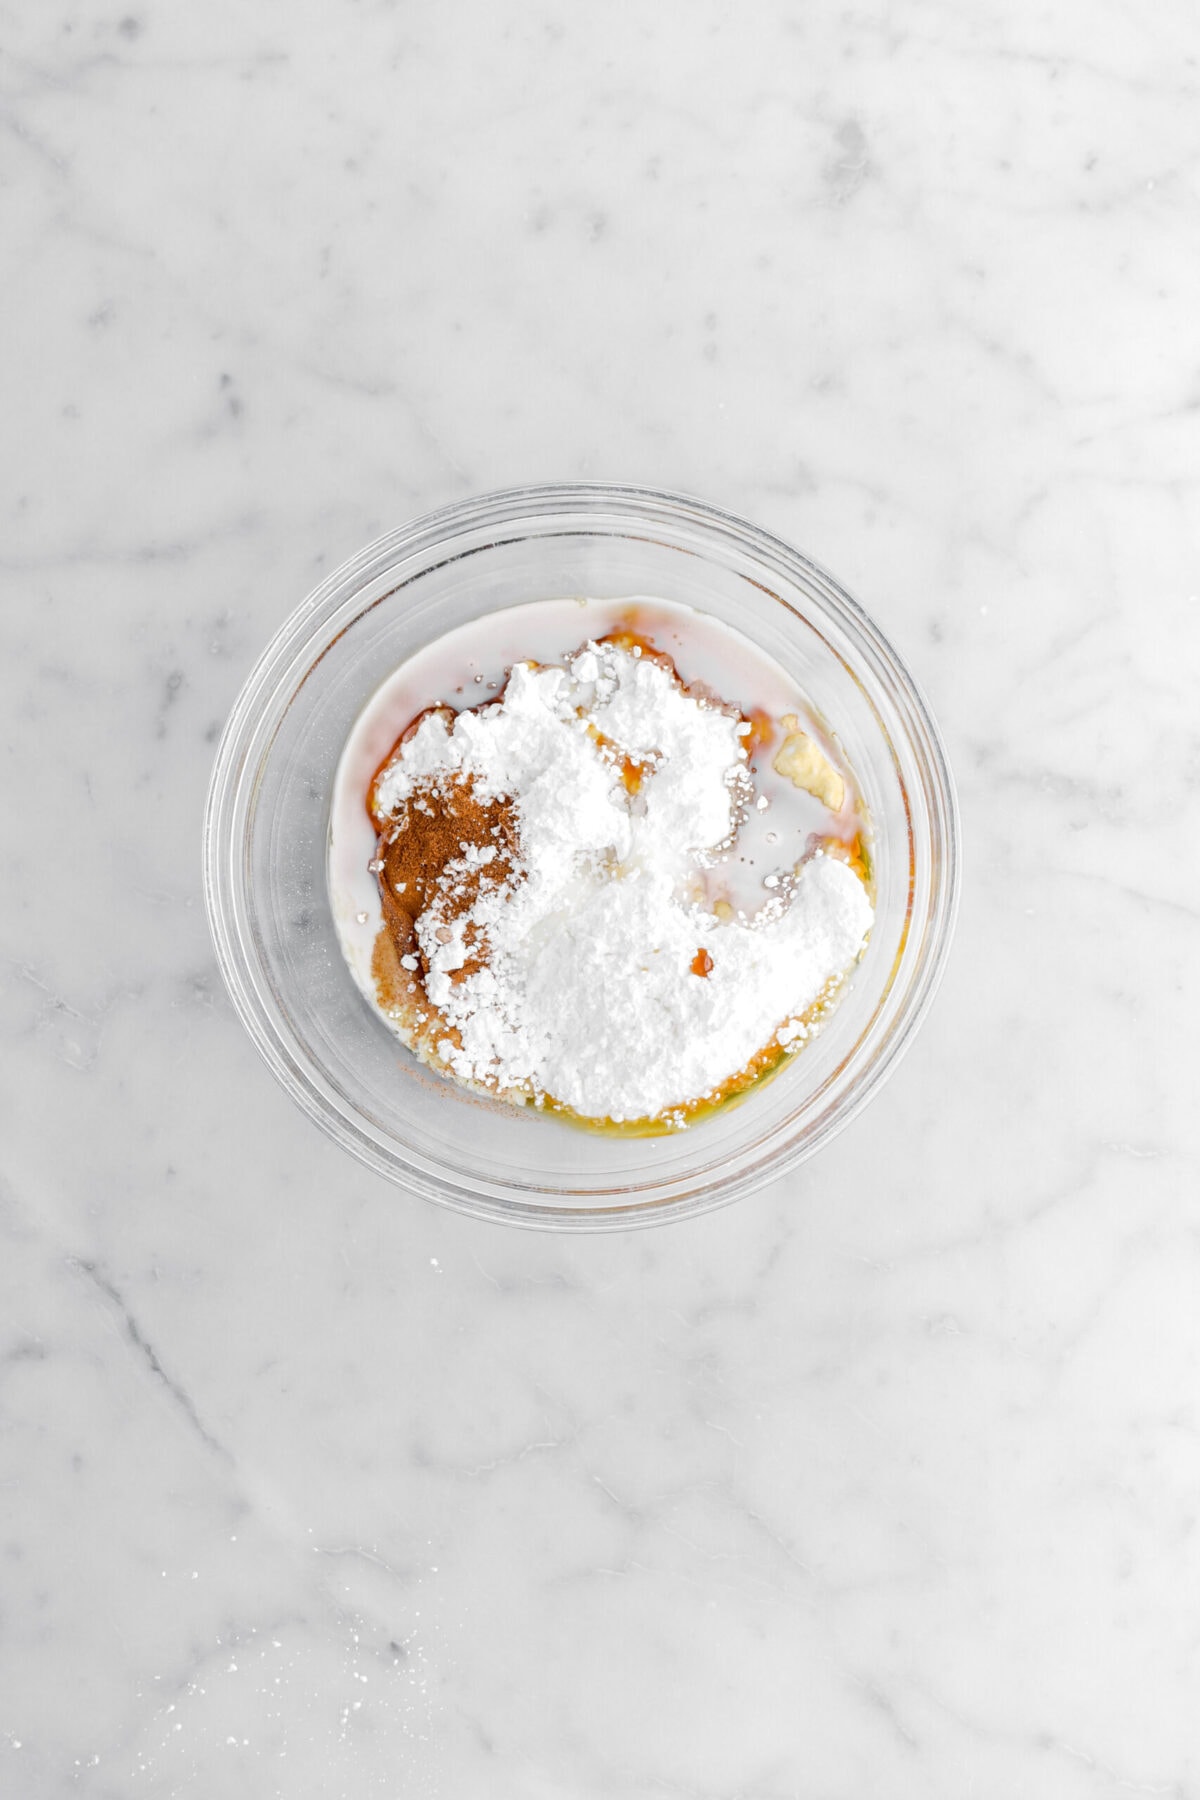 powdered sugar, spice, maple syrup, and milk in glass bowl.